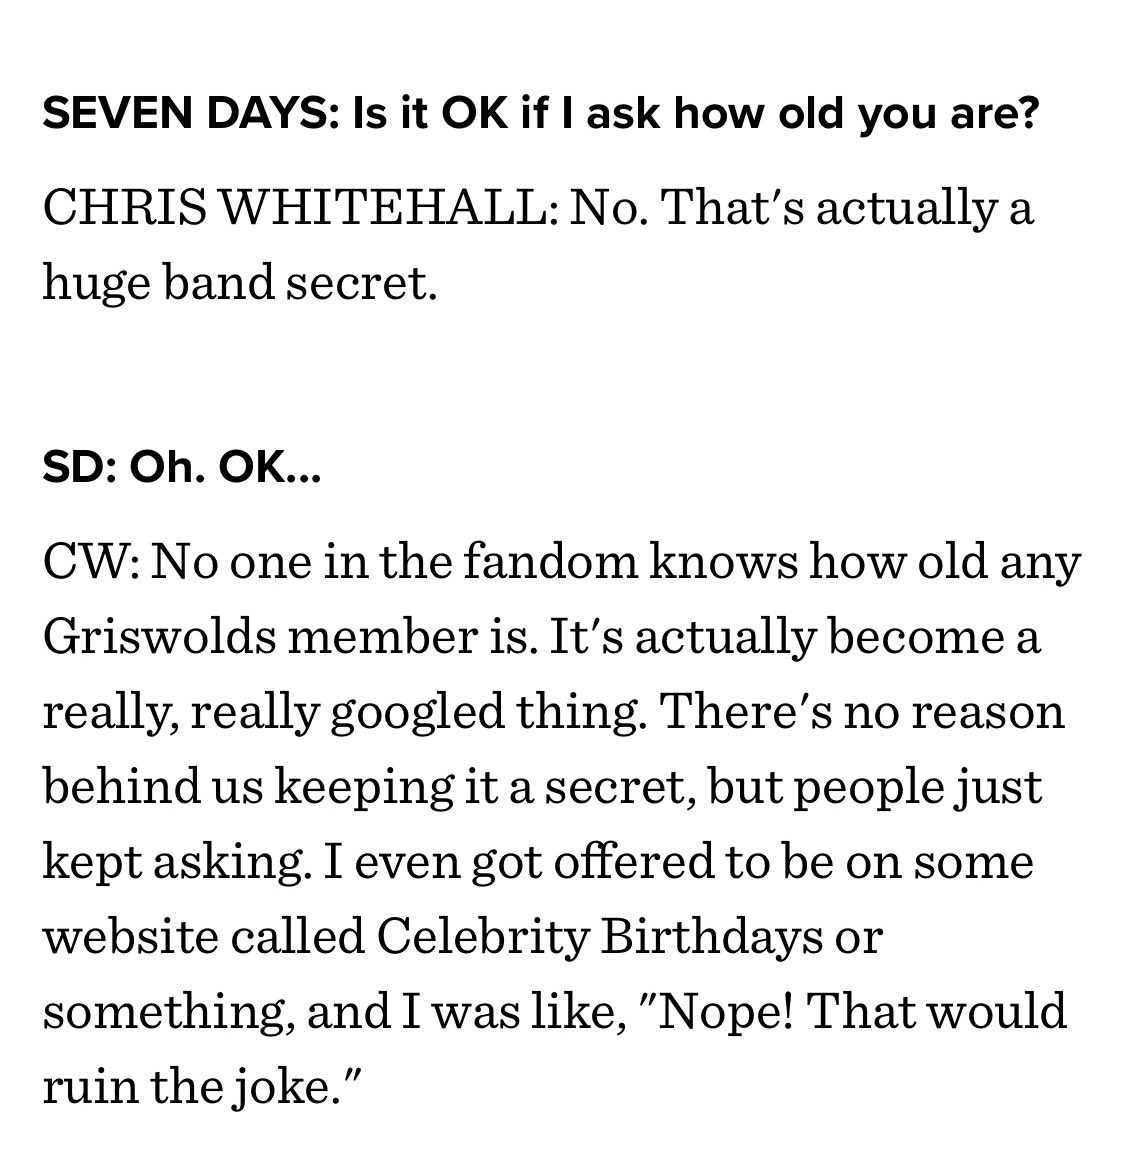 I’m still not entirely sure how old Chris is, because he told me so many different things. From what I’ve heard, I believe he’s at least a decade older than I am. Here’s an interview where he jokes about keeping his age a secret from his fan base.  https://www.sevendaysvt.com/vermont/the-griswolds-chris-whitehall-on-nonstop-touring-hitting-rock-bottom-and-moving-to-the-united-states/Content?oid=4376456